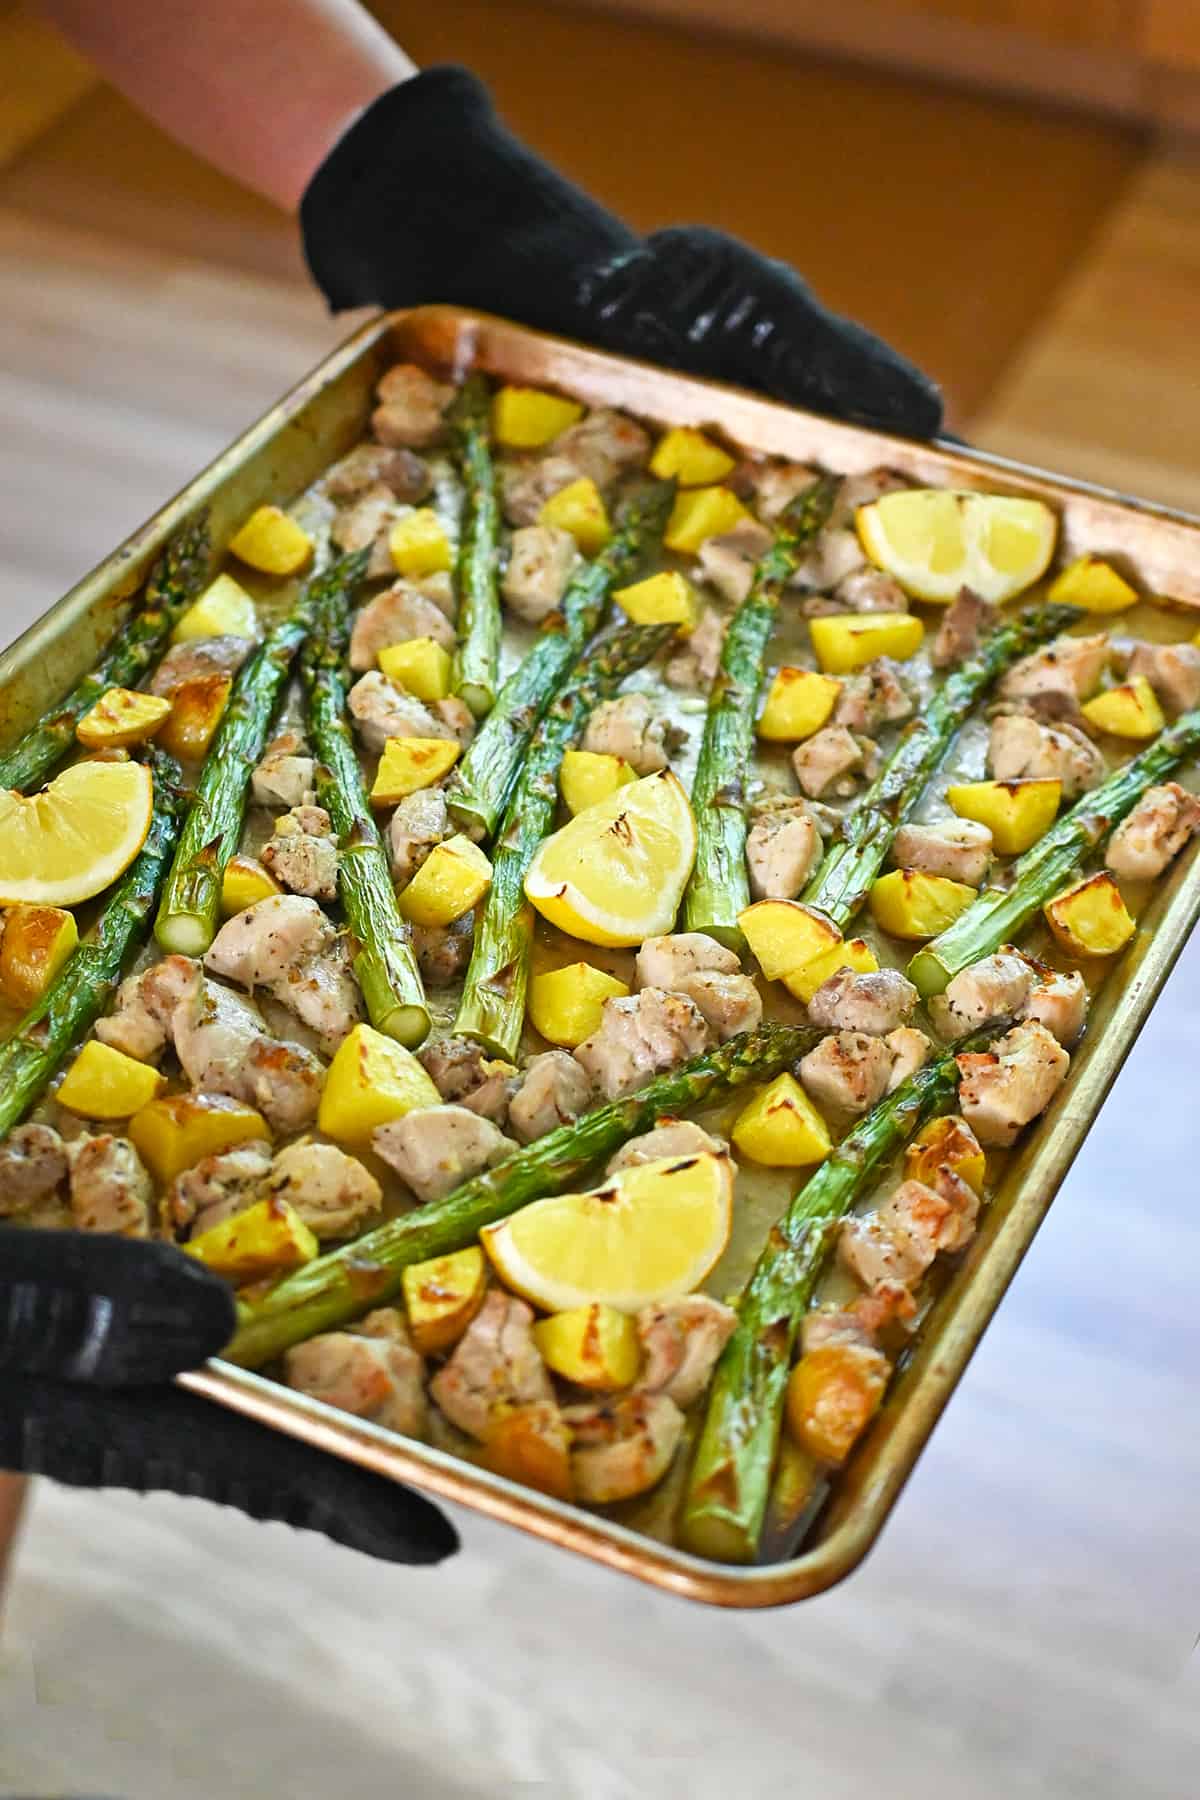 Two hands in oven mitts are holding a sheet pan filled with golden brown chicken, potatoes, asparagus, and lemon wedges.